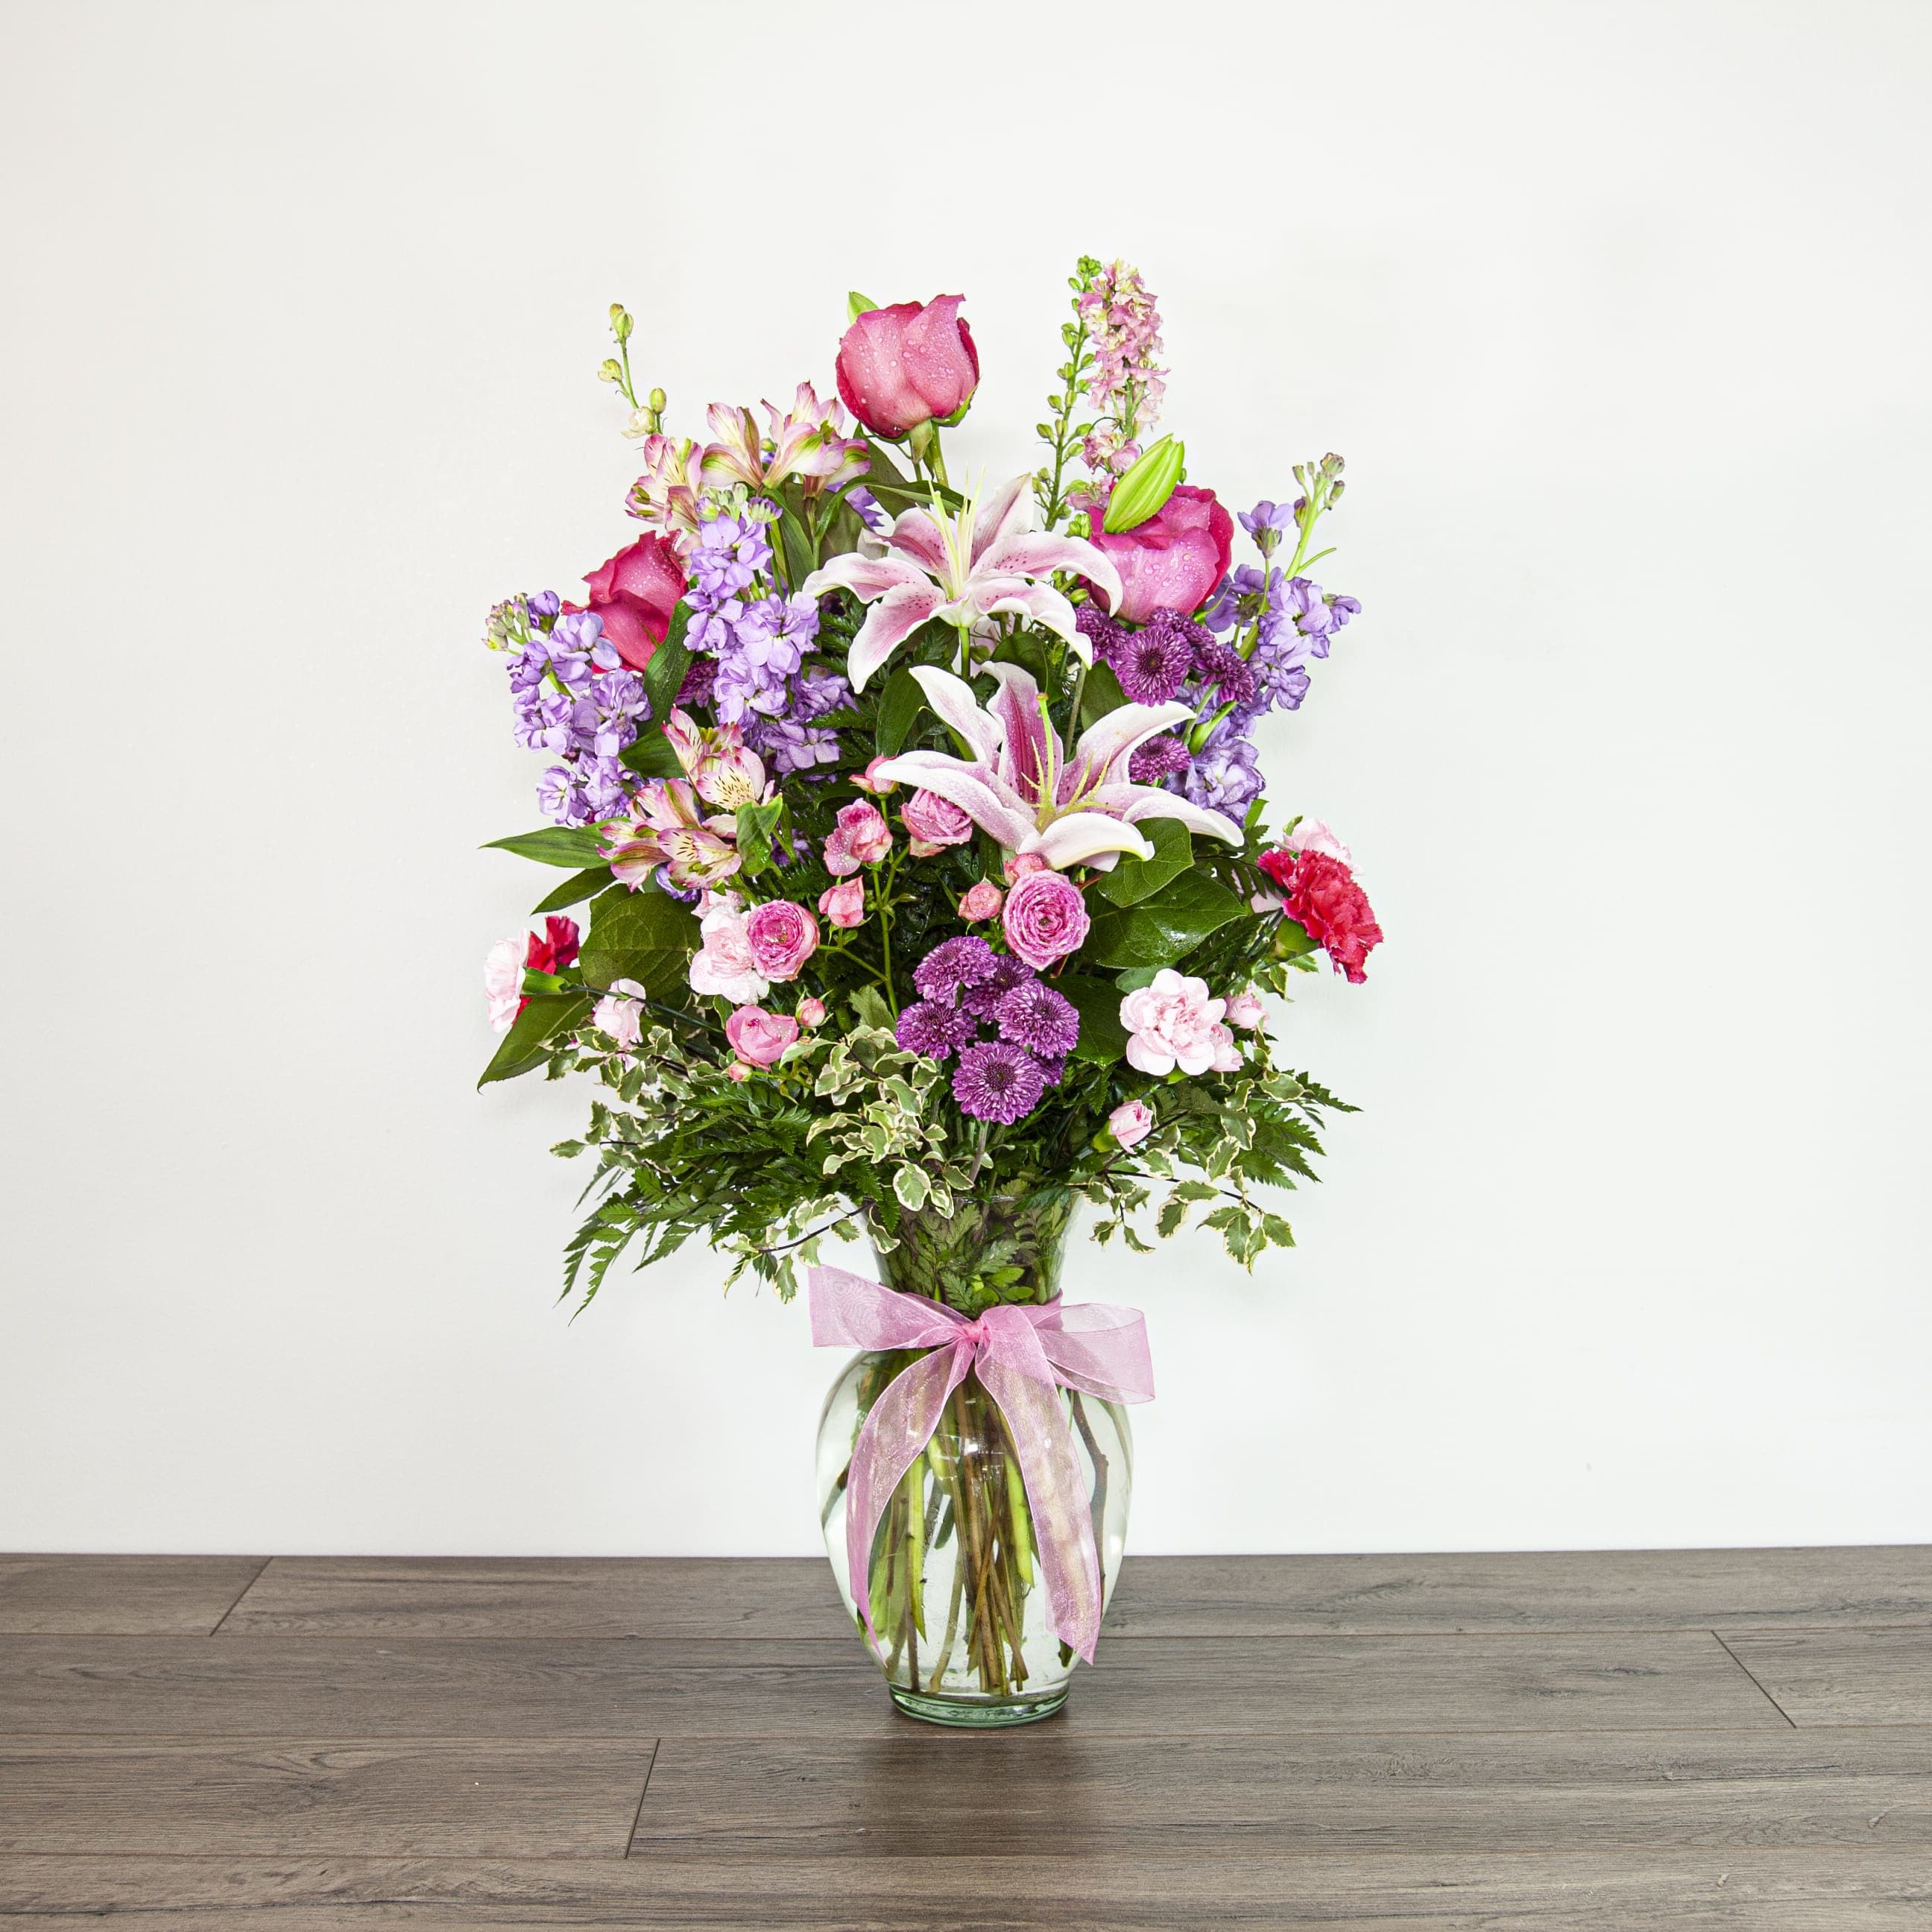 Extraordinarily Sweet (EXP 49-A) - Immerse yourself into the spring season with this large and full-of-life centerpiece, filled with pink and purple blooms. The look is finished off with a bow.  Blooms in this arrangement: -  hot pink spray rose stems -  sorbonne lilies -  pink alstromeria stems -  purple button pom stems -  hot pink carnations -  lavender stock -  pink larkspurs -  hot pink roses